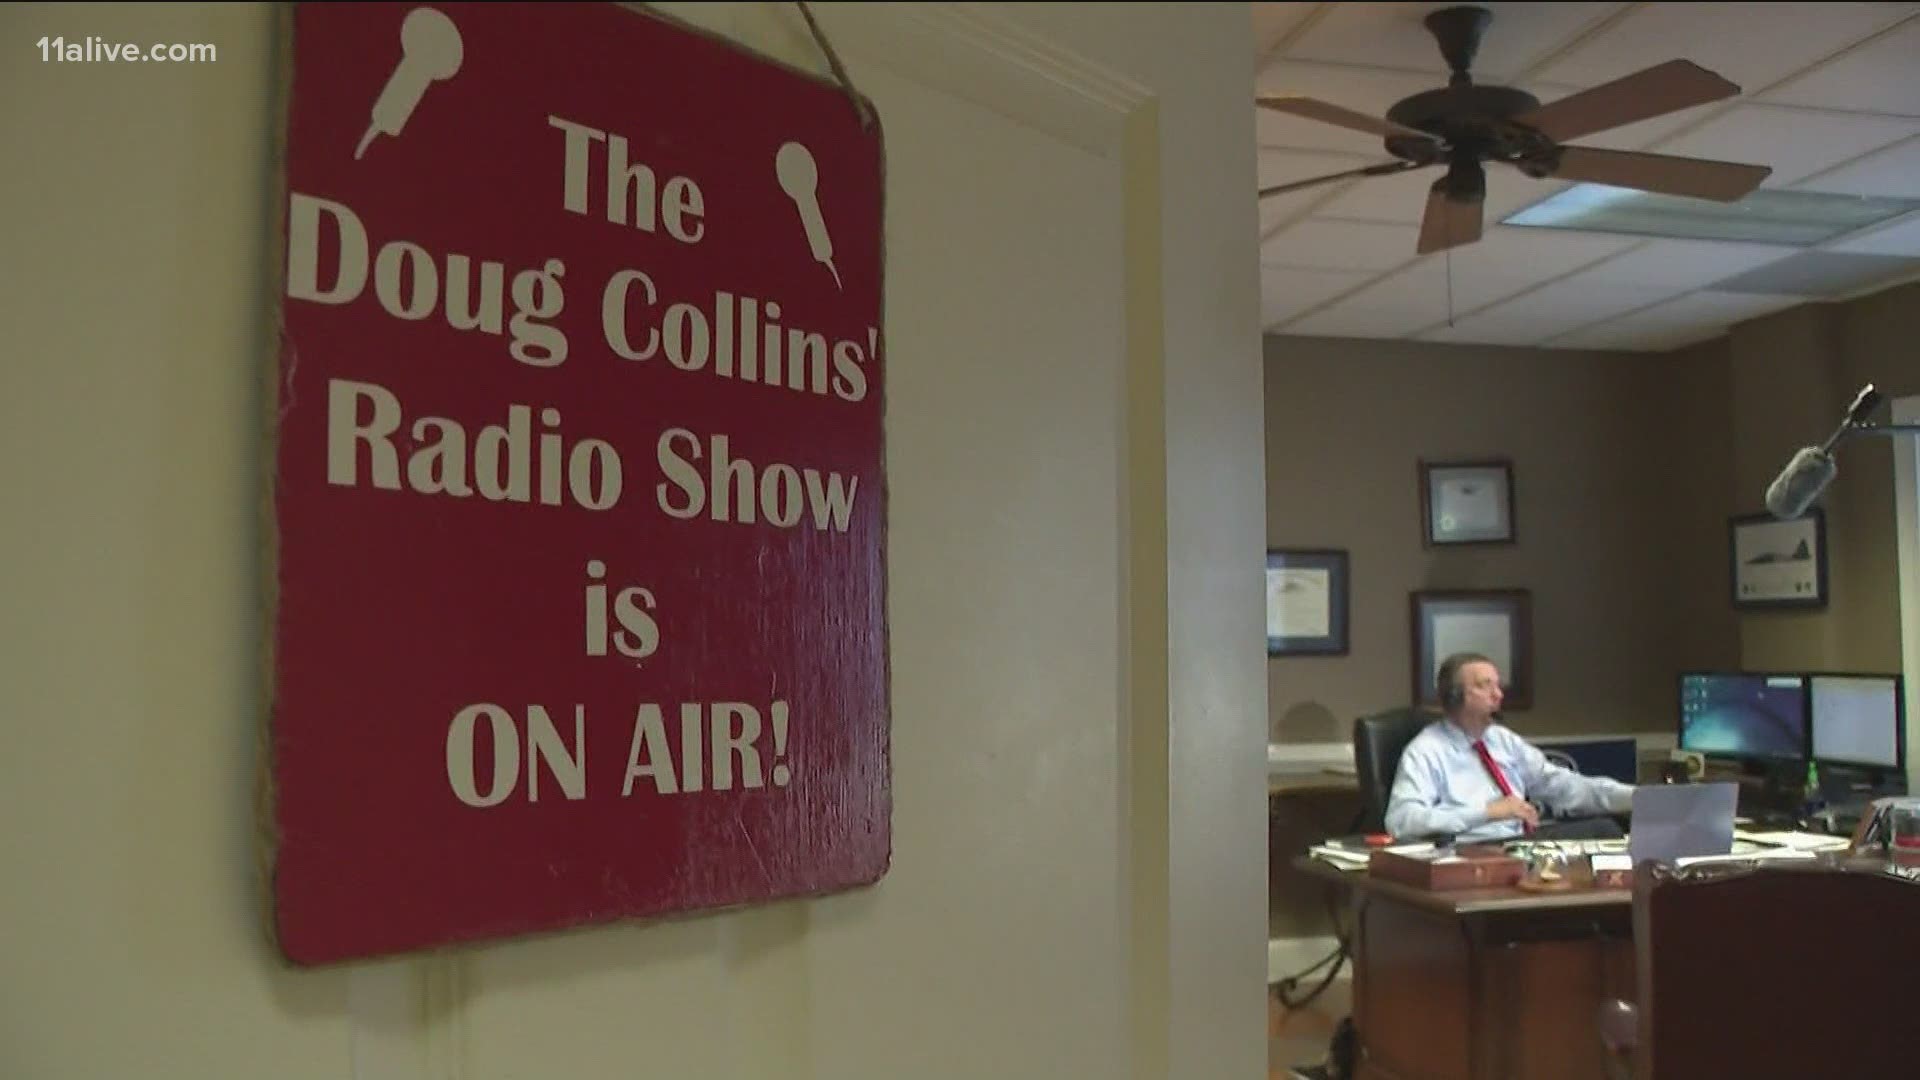 The ex-congressman goes on-air this week as he weighs his political options.